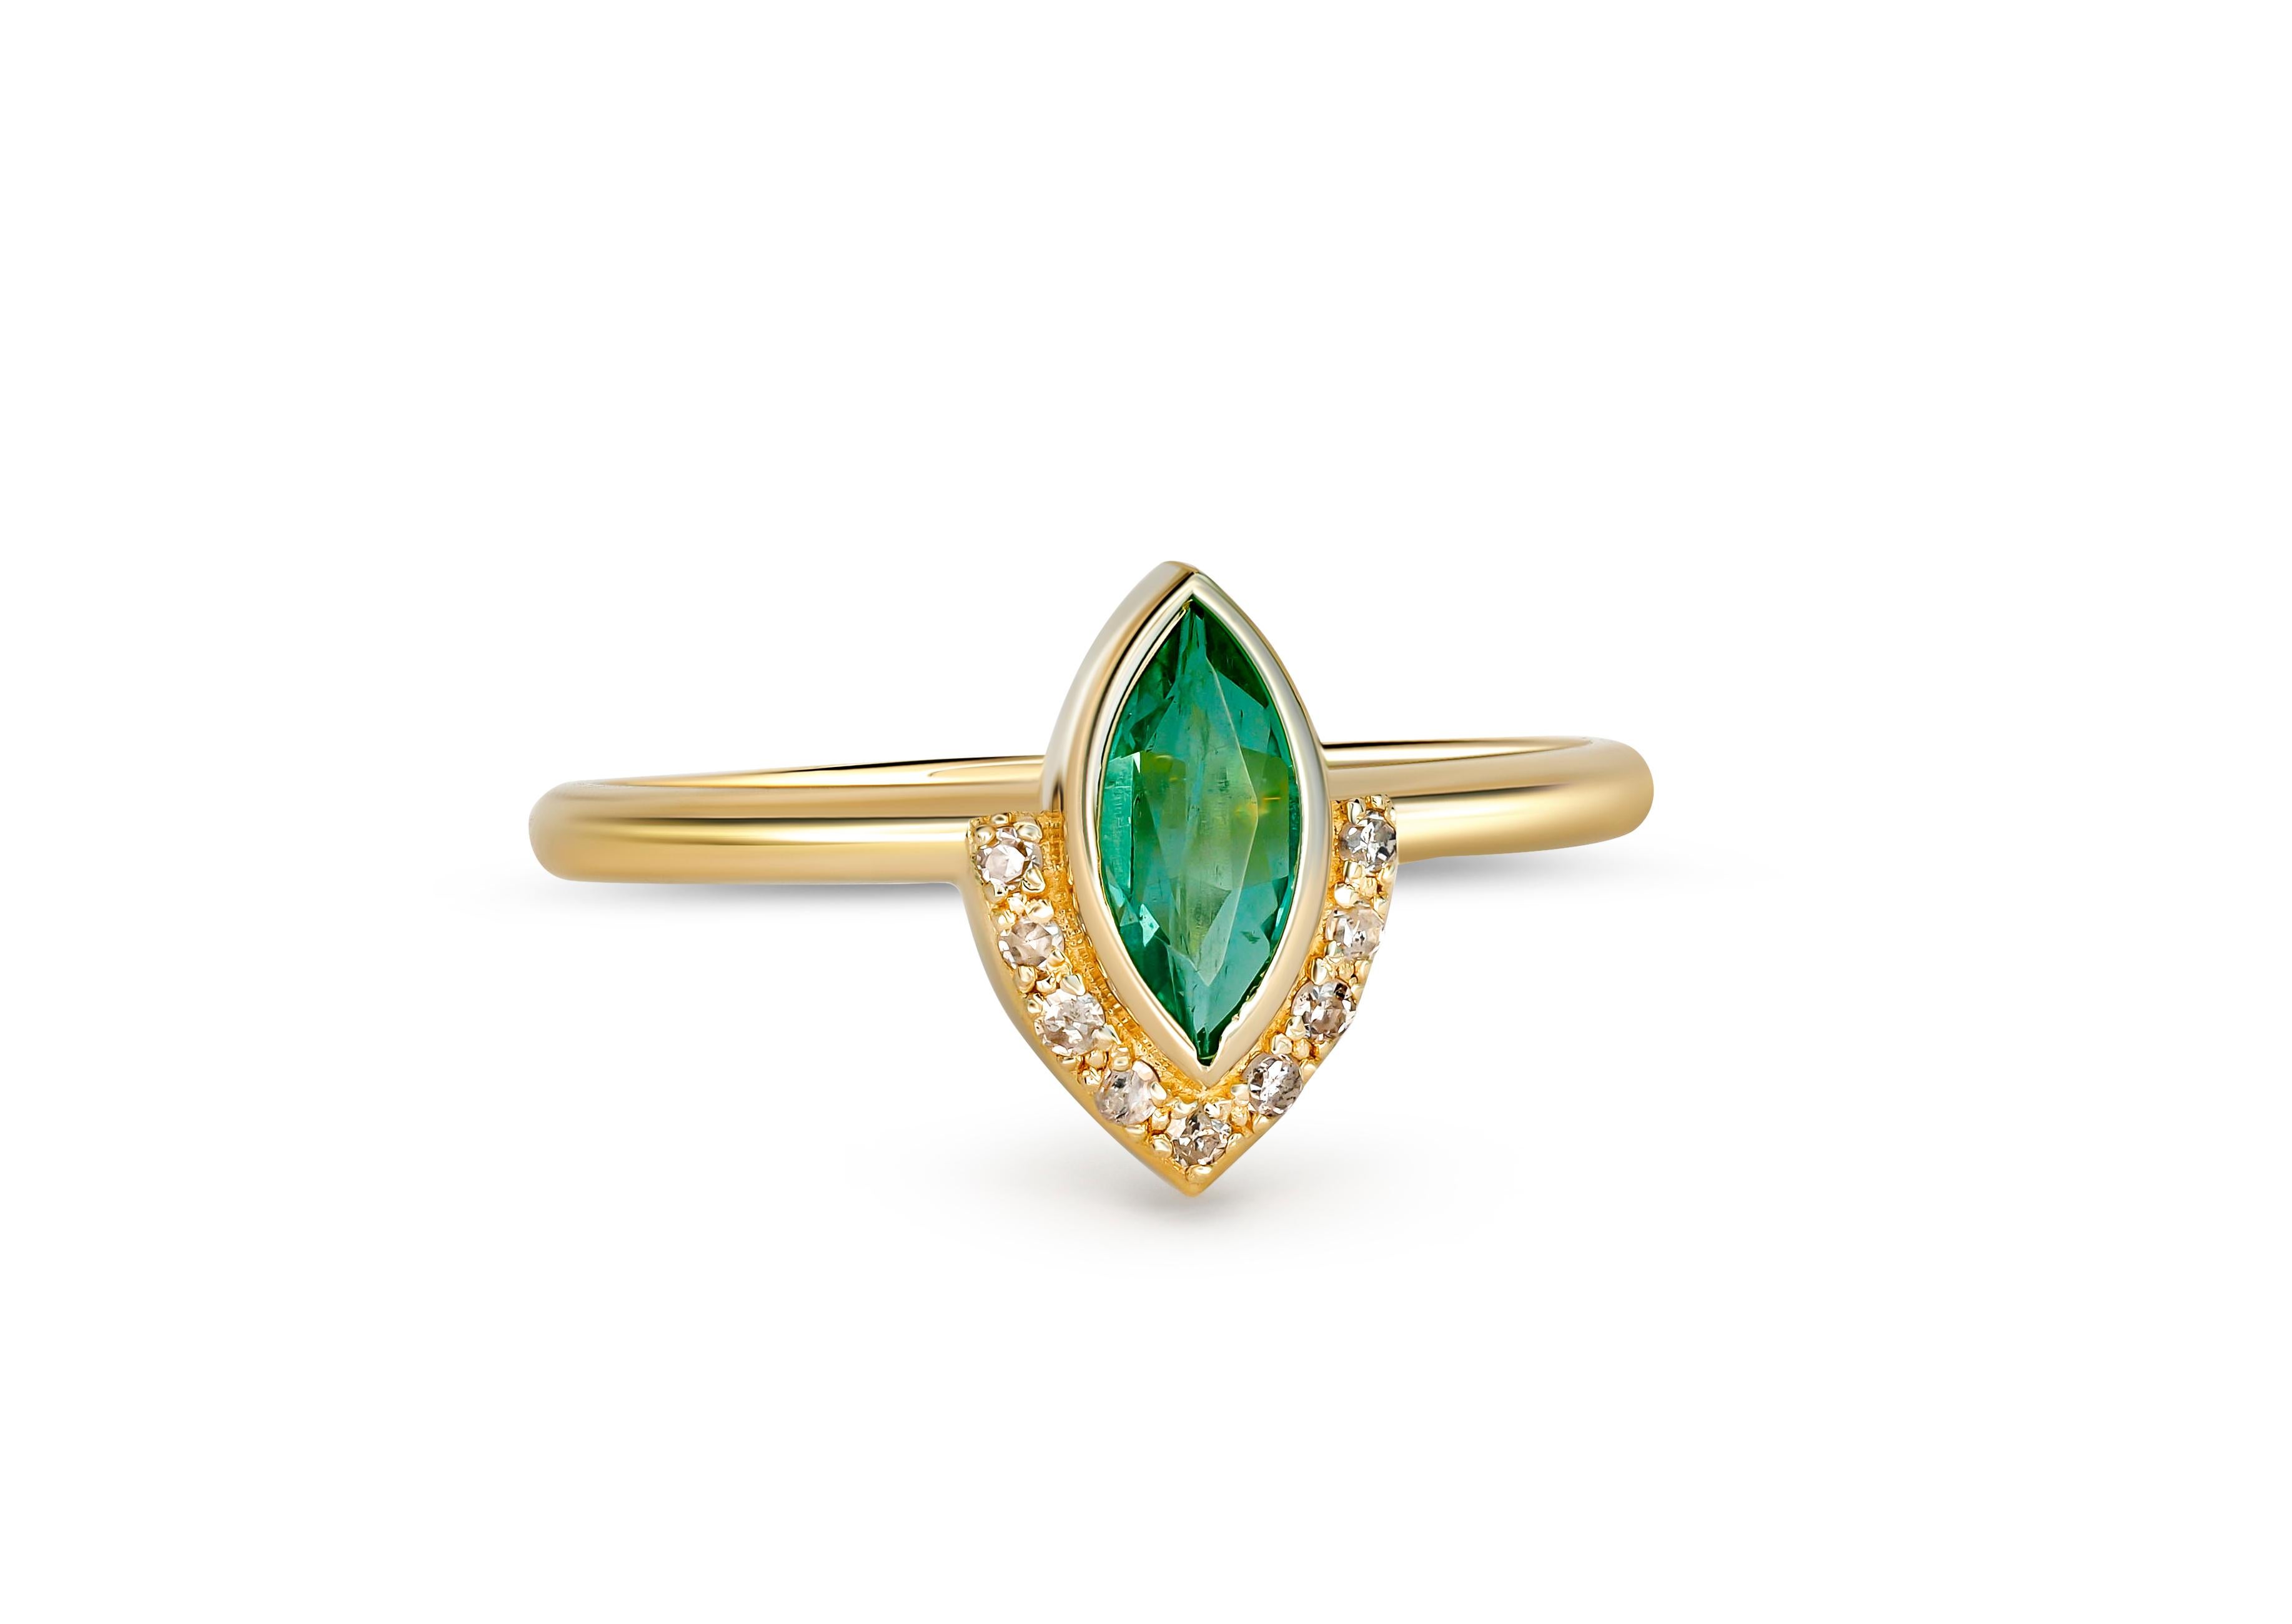 Marquise Emerald Ring. 
Natural Emerald Ring in 14k Solid Gold. Emerald engagement ring. May Birthstone. Gemstone Ring. Statement ring.

Metal: 14k gold
Weight: 1.75 g. depends from size.

Set with emerald, color - green
Marquise cut, 0.70 ct. in